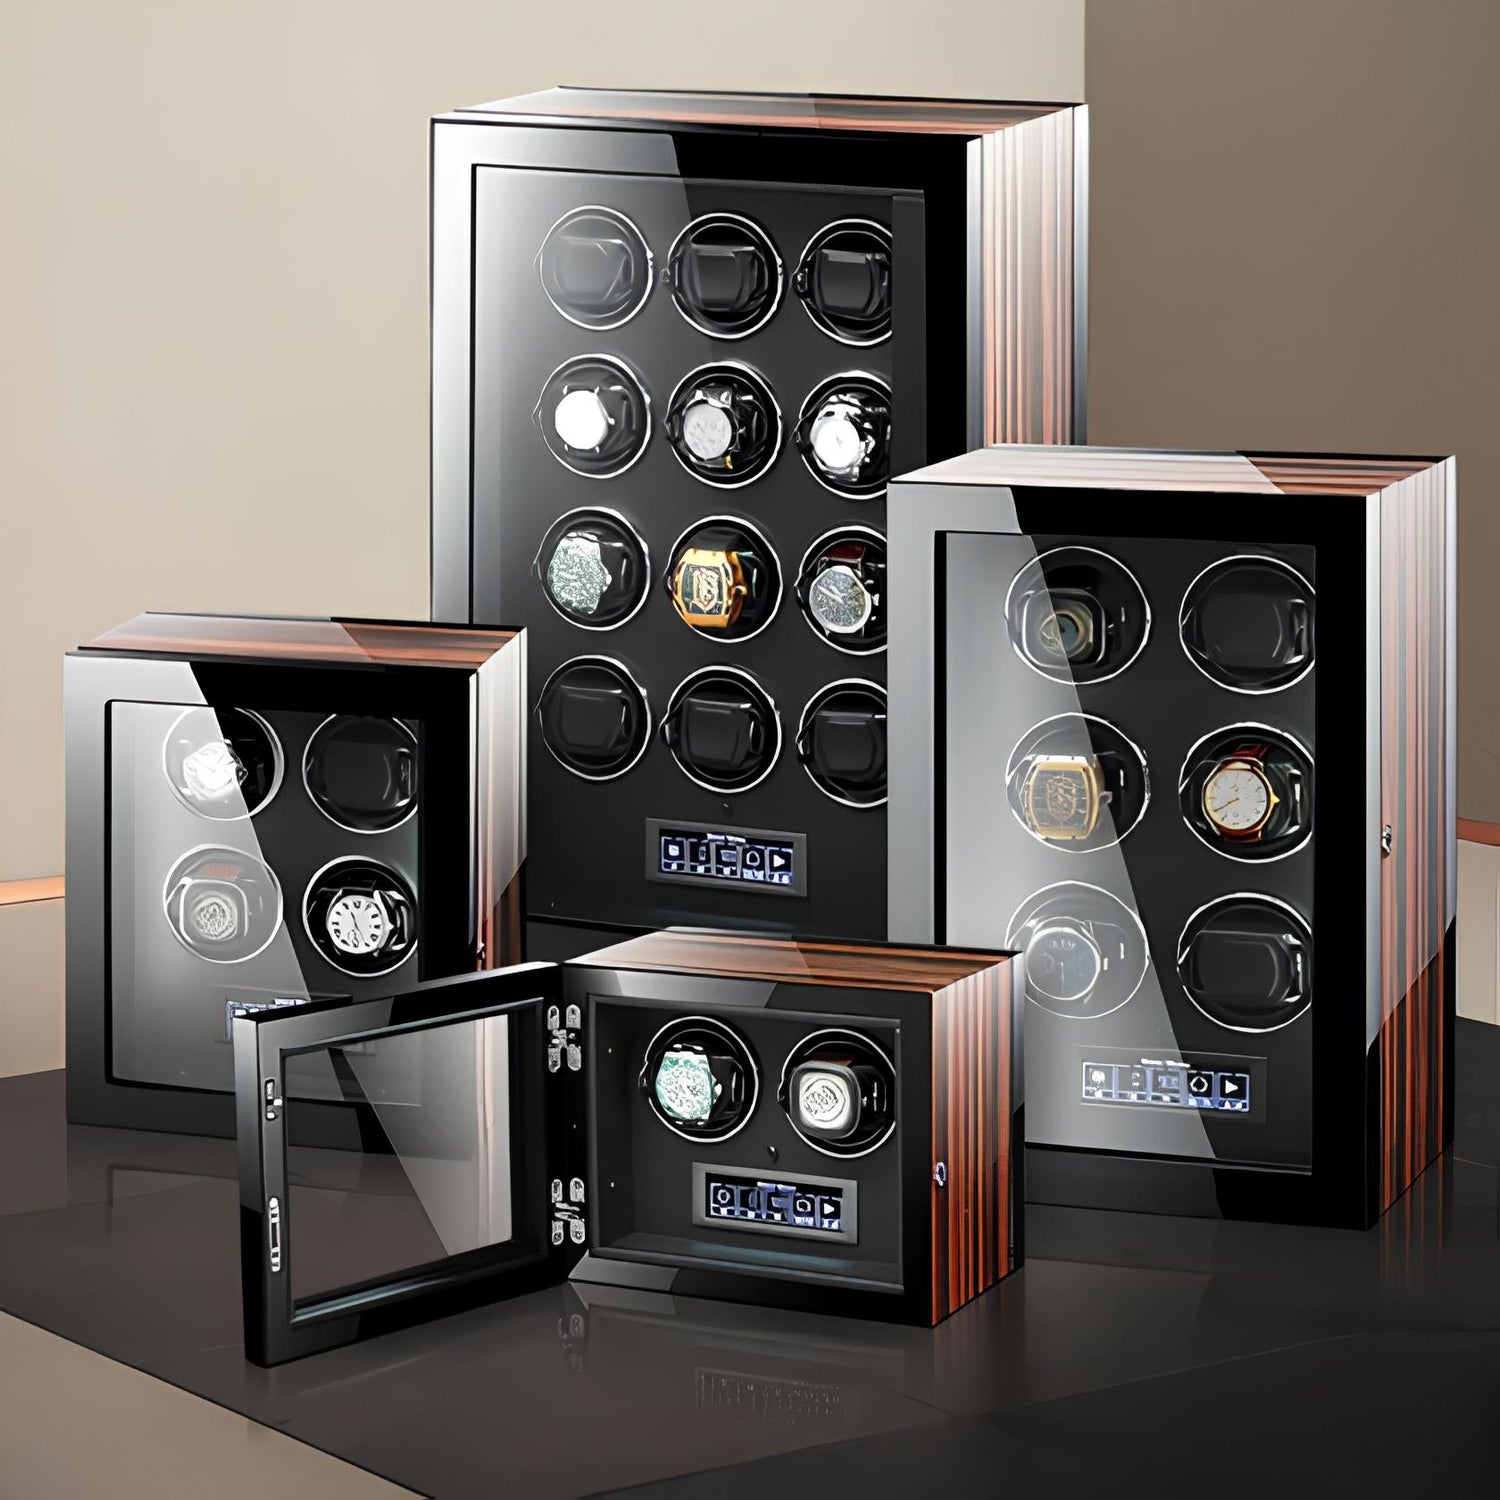 What Is a Watch Winder